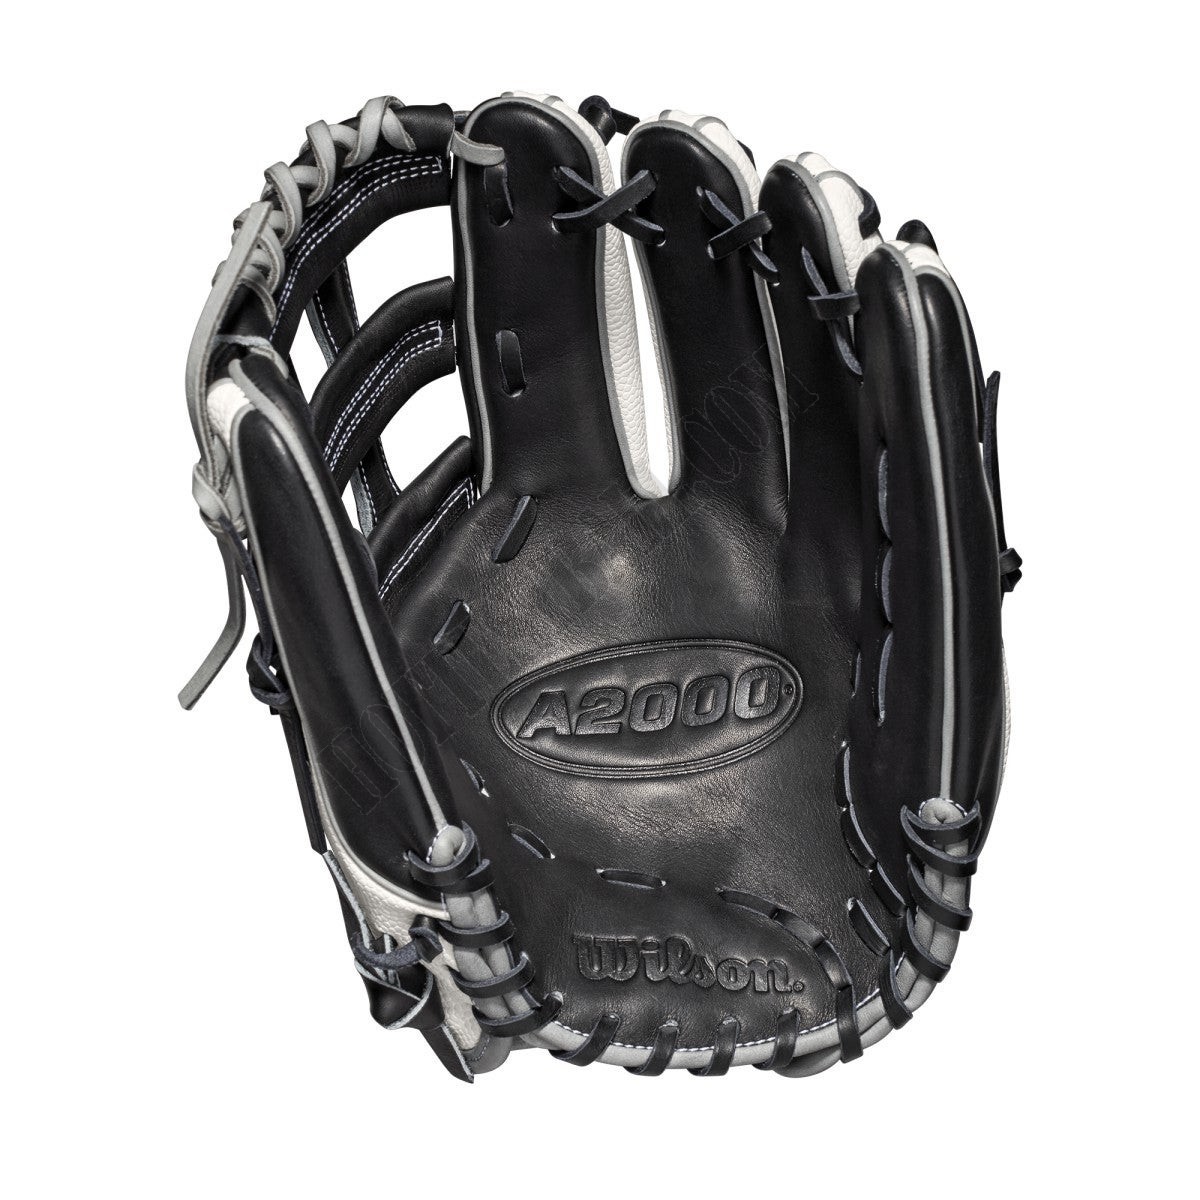 2019 A2000 FP12 SuperSkin 12" Infield Fastpitch Glove - Right Hand Throw ● Wilson Promotions - -2